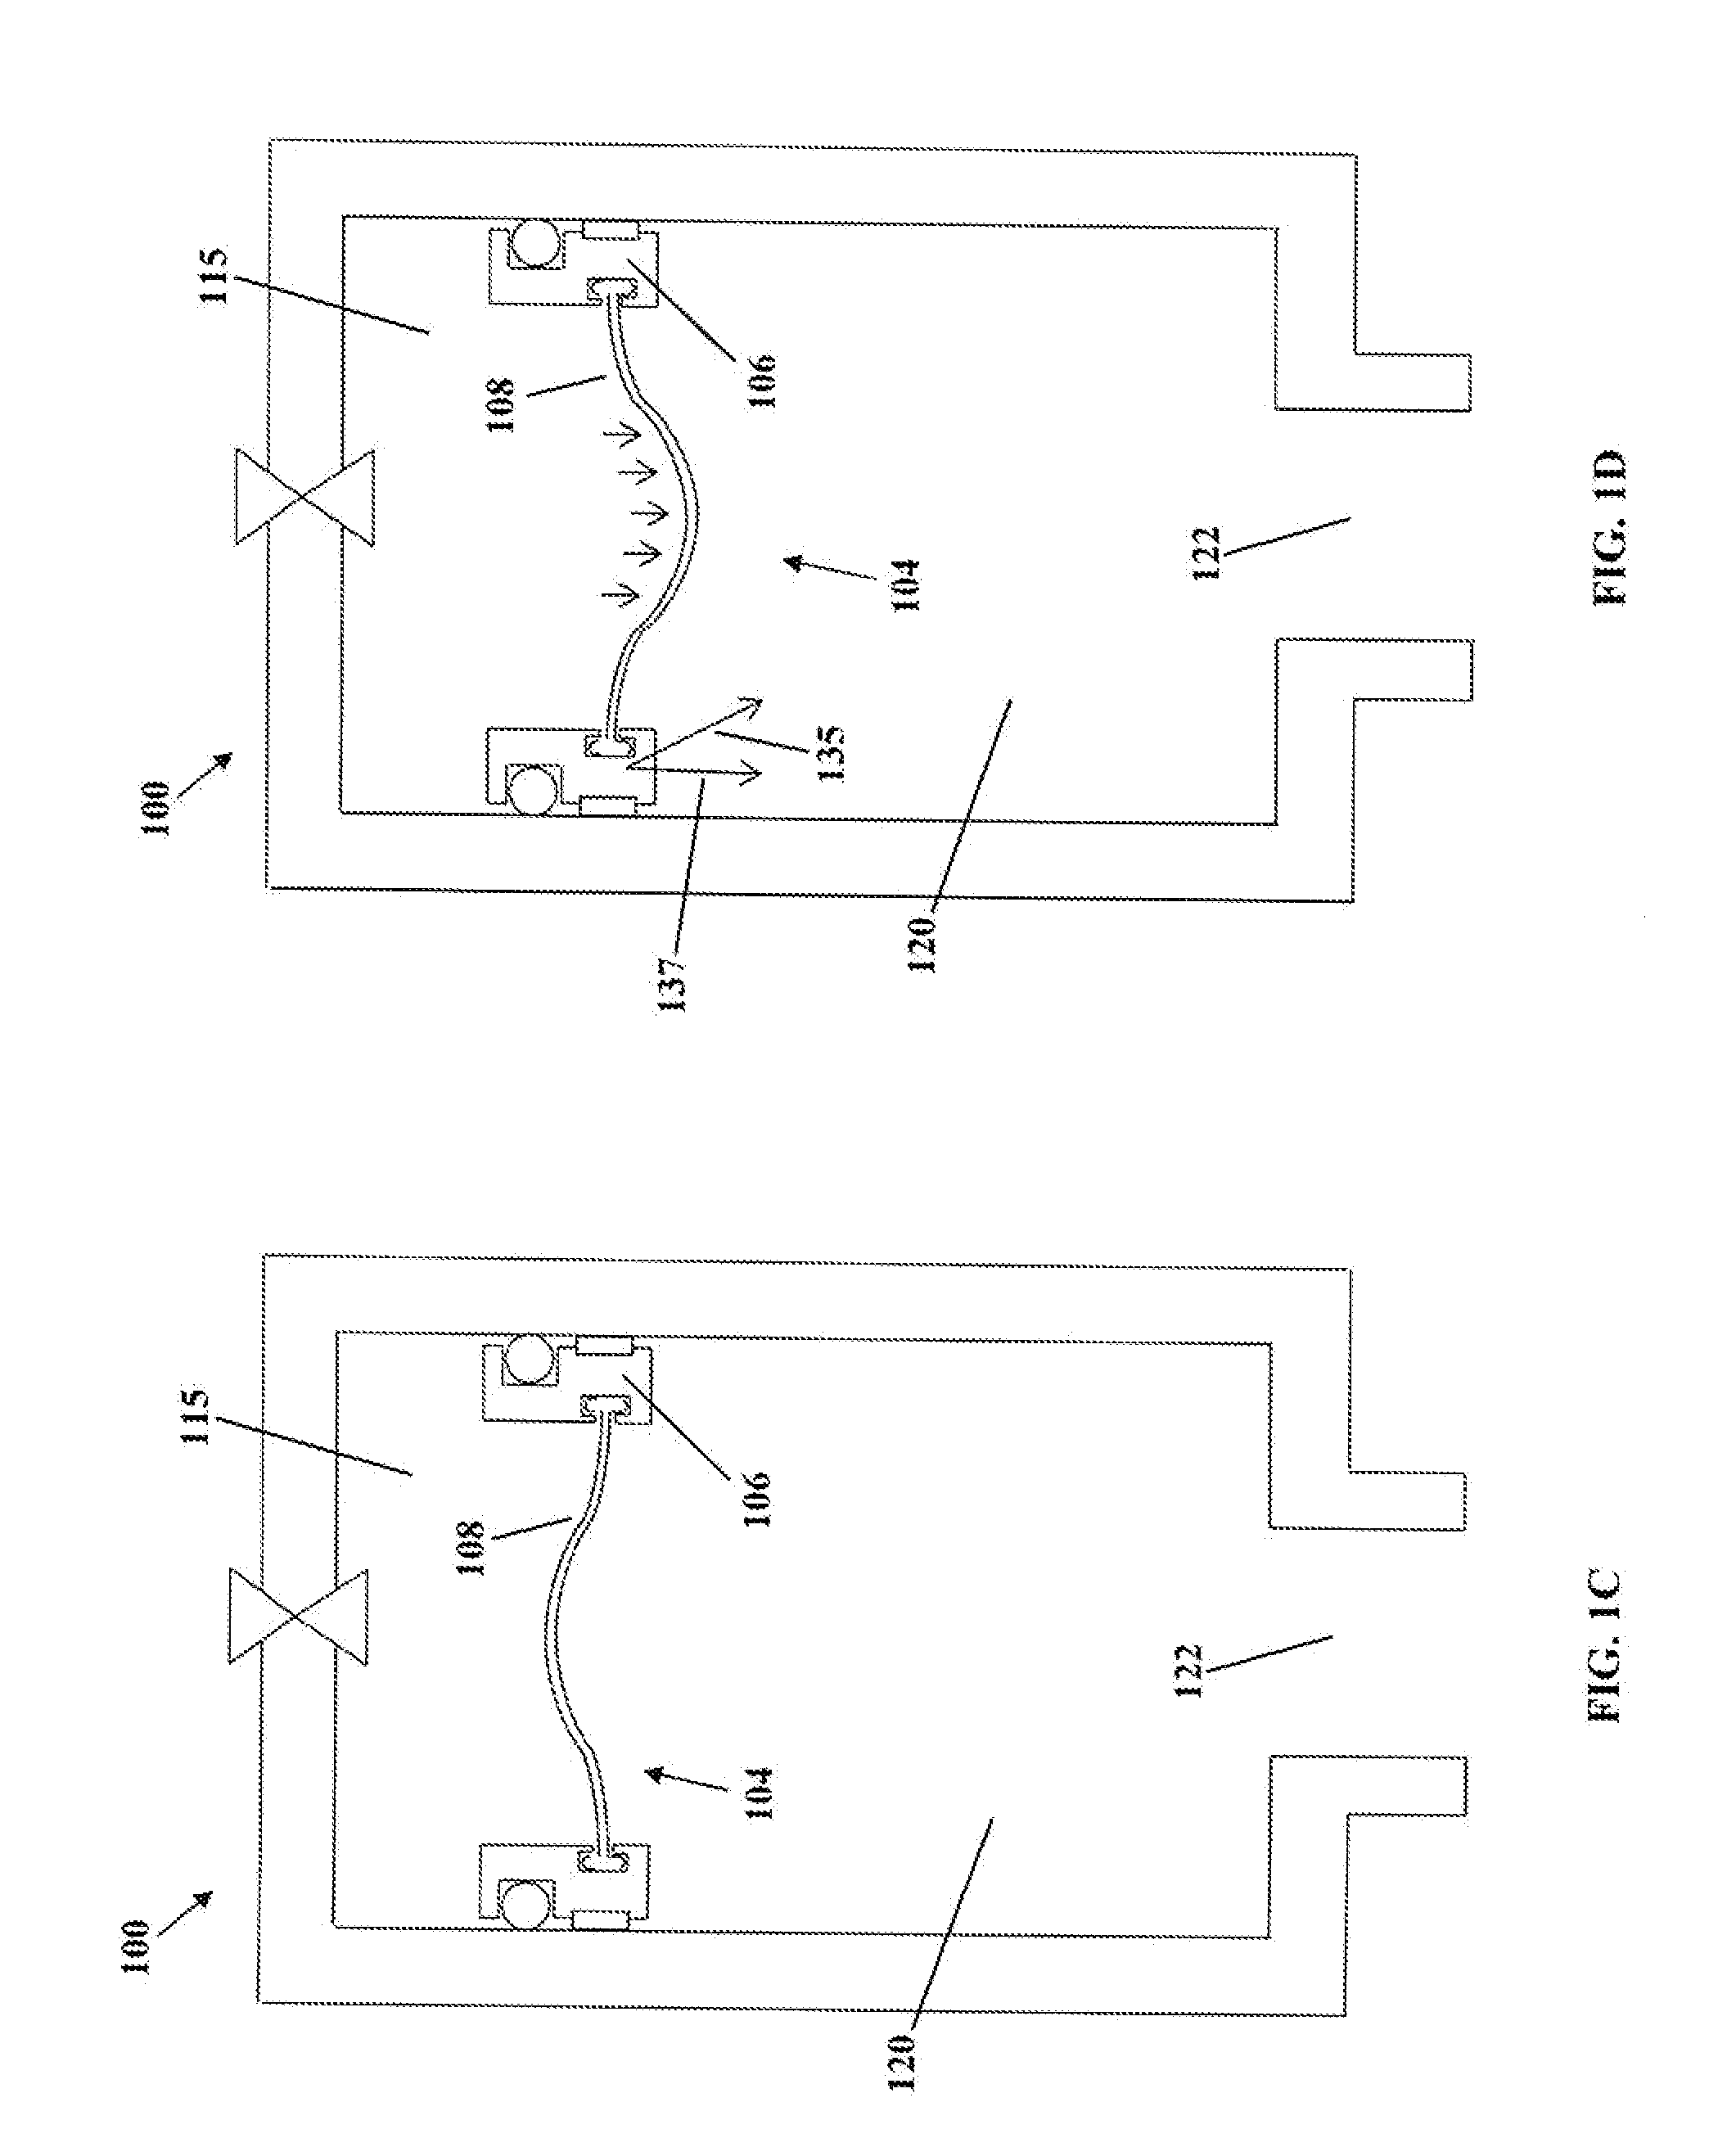 Broad pressure and frequency range accumulator